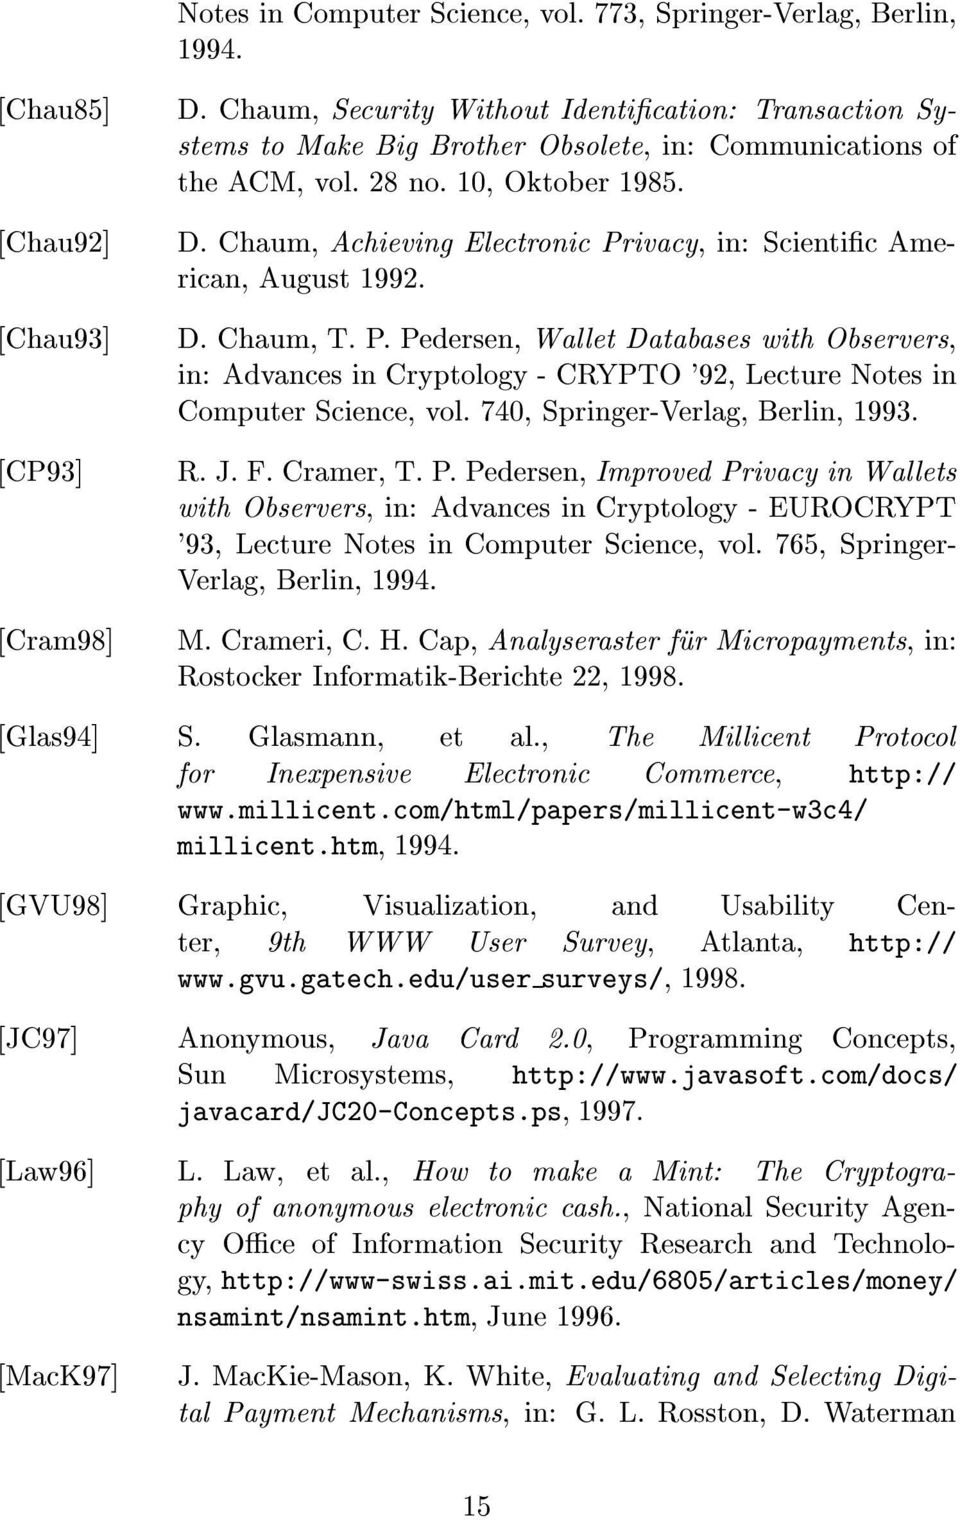 Chaum, Achieving Electronic Privacy, in: Scientic American, August 1992. D. Chaum, T. P. Pedersen, Wallet Databases with Observers, in: Advances in Cryptology - CRYPTO '92, Lecture Notes in Computer Science, vol.